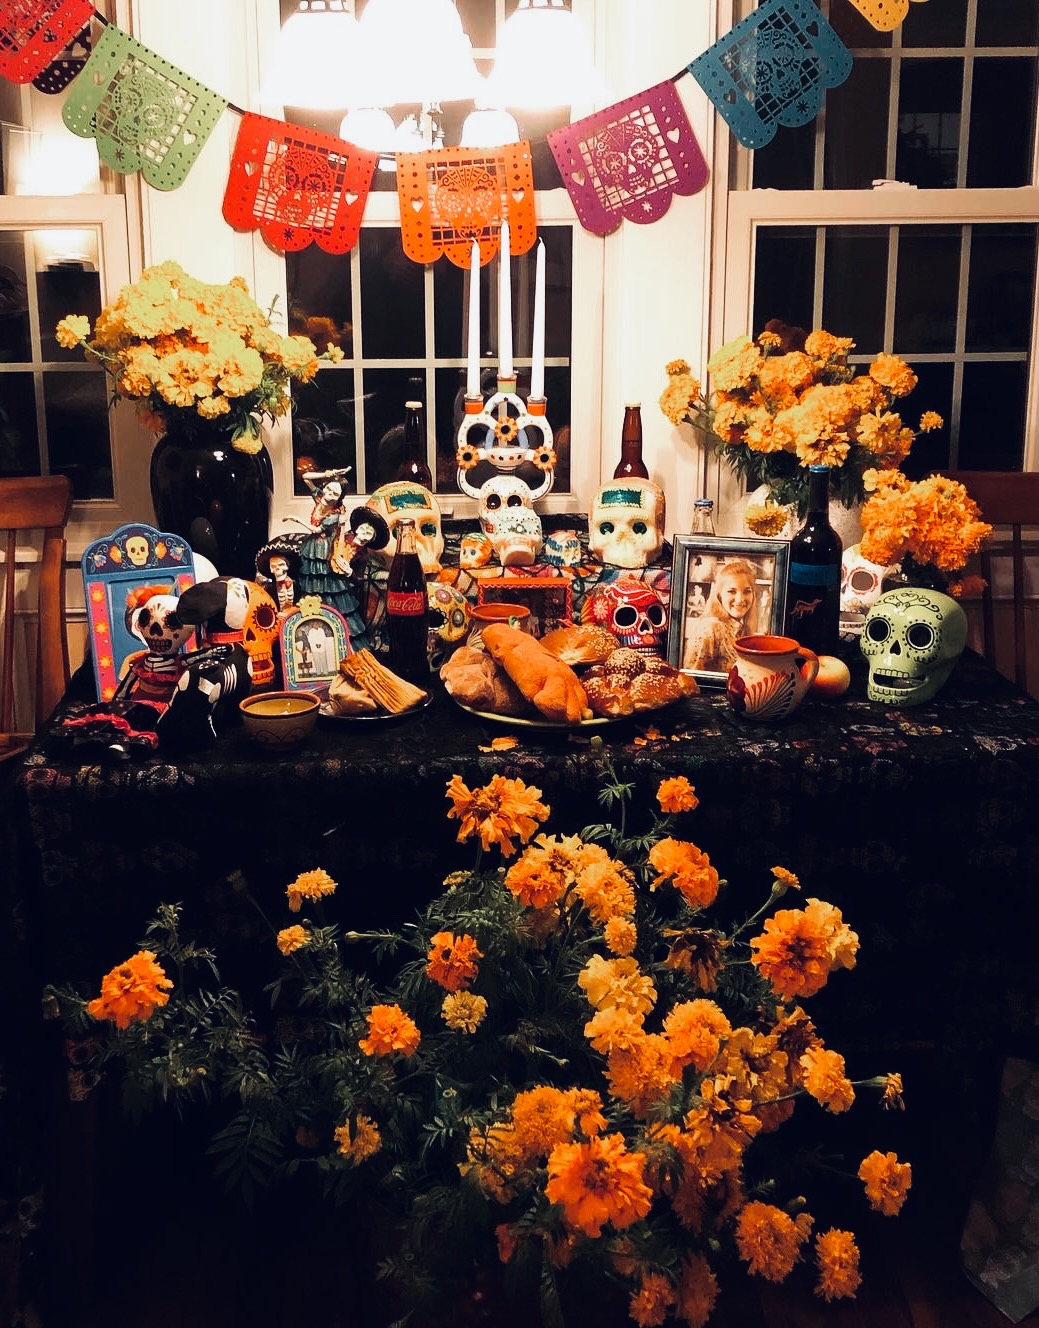 An ofrenda, an annual tradition at the center of Dia de los Muertos. This ofrenda was assembled in the house of English teacher Emma Ruiz. Her family celebrates Dia de los Muertos annually. 